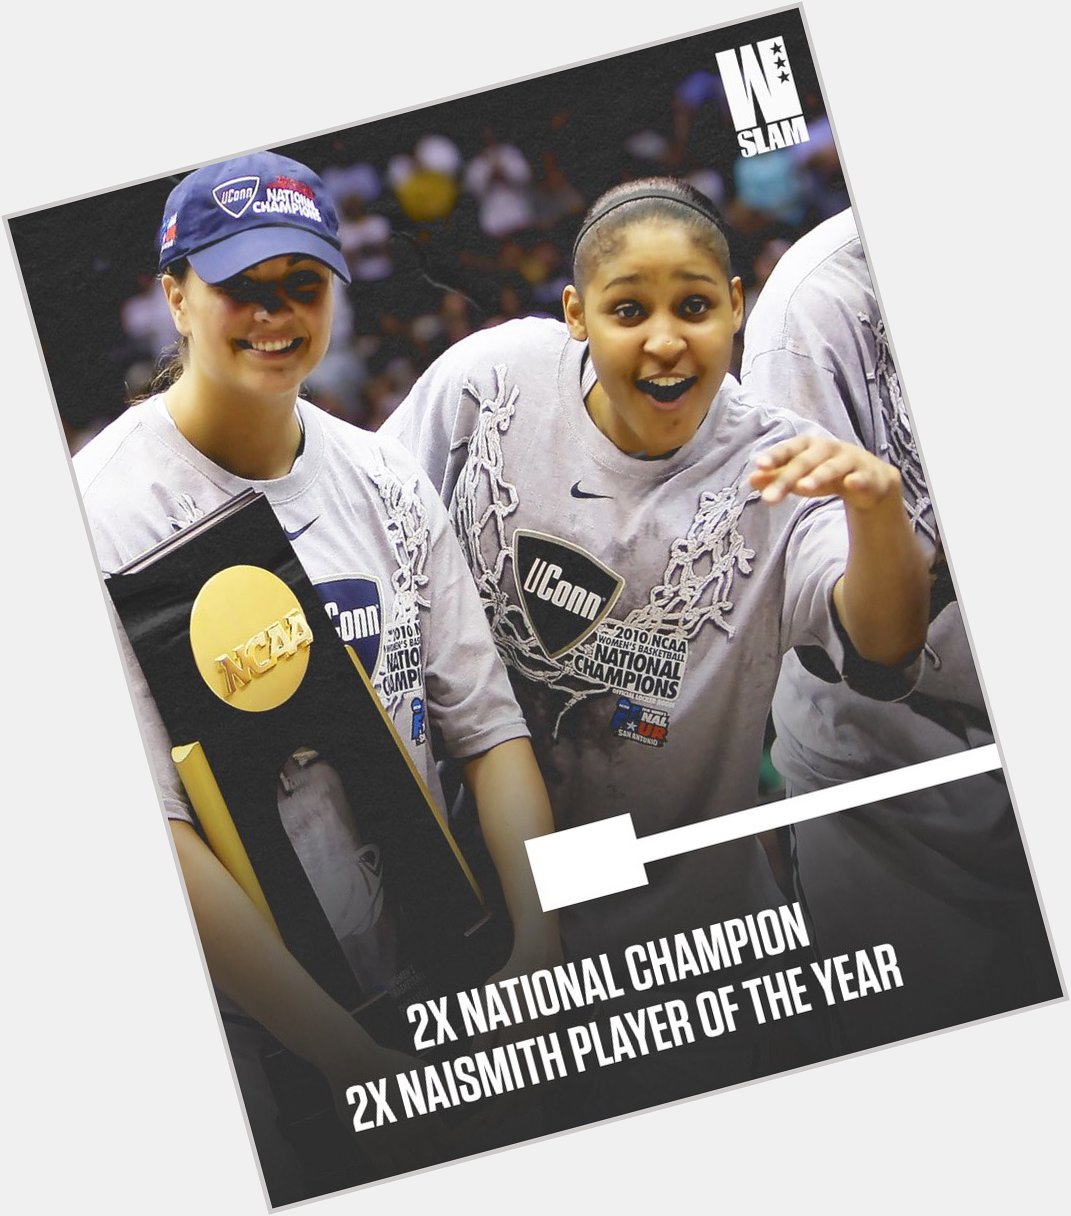 Maya Moore s impact goes beyond the game of basketball. 

HAPPY BIRTHDAY TO THE LEGEND  